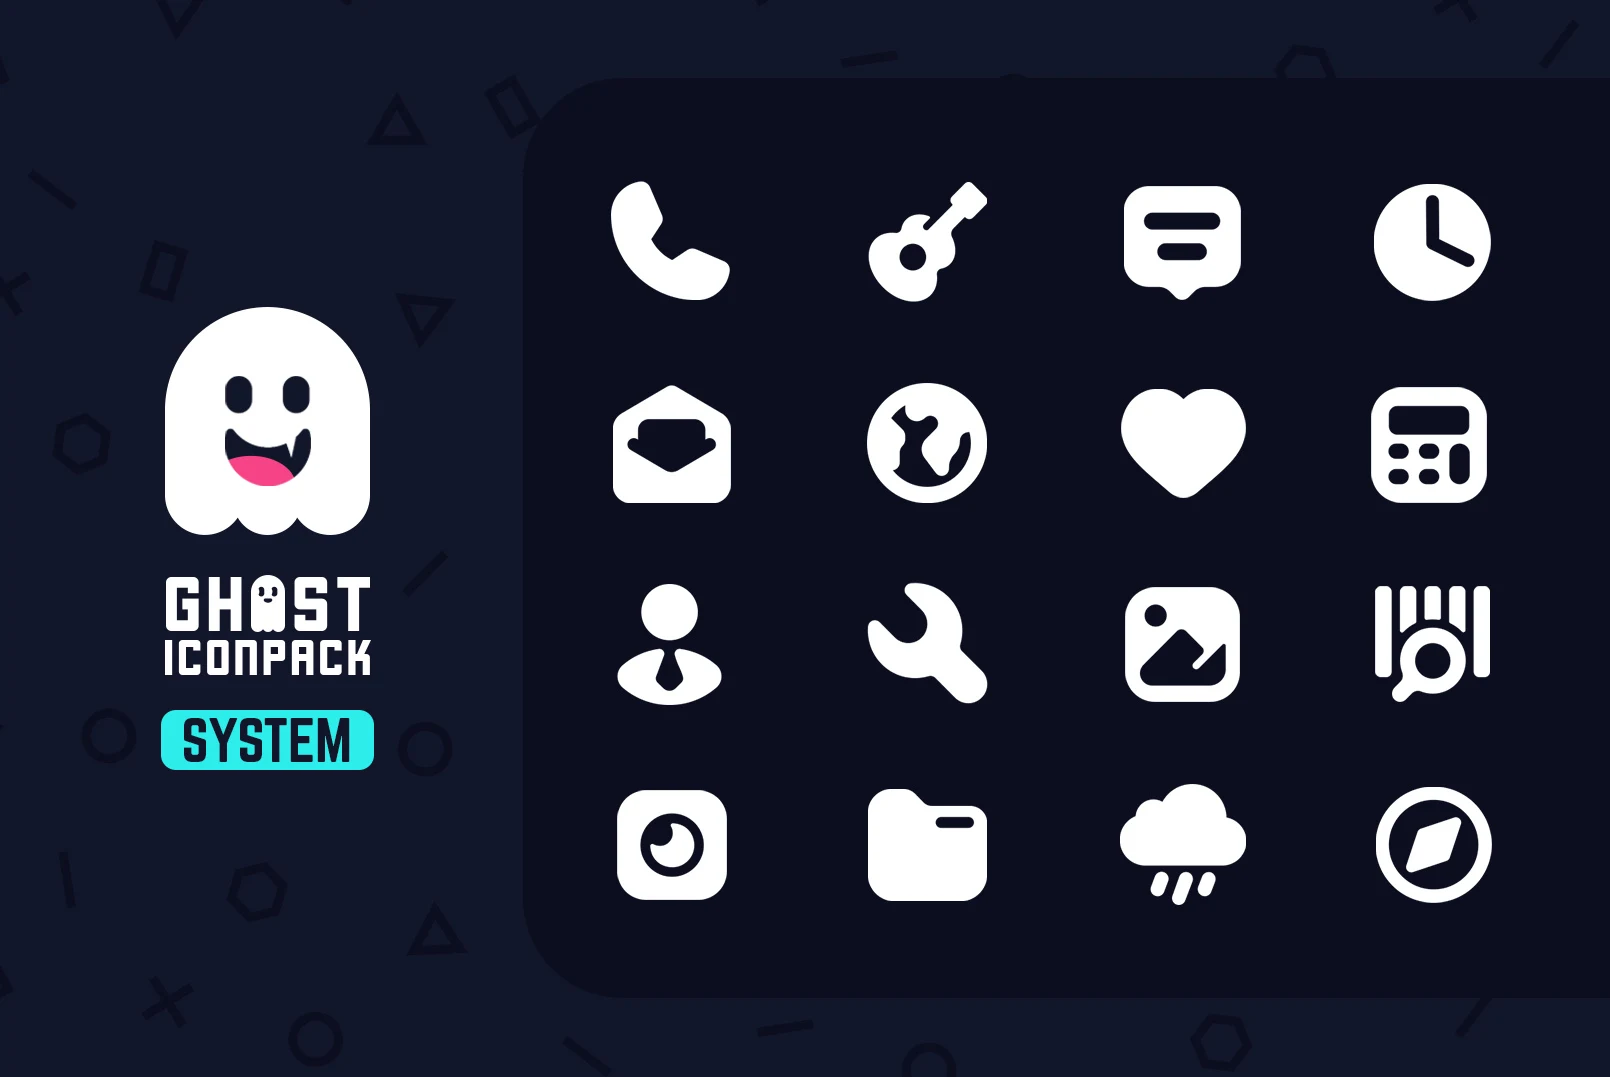 Ghost IconPack Mod Apk (Patched)